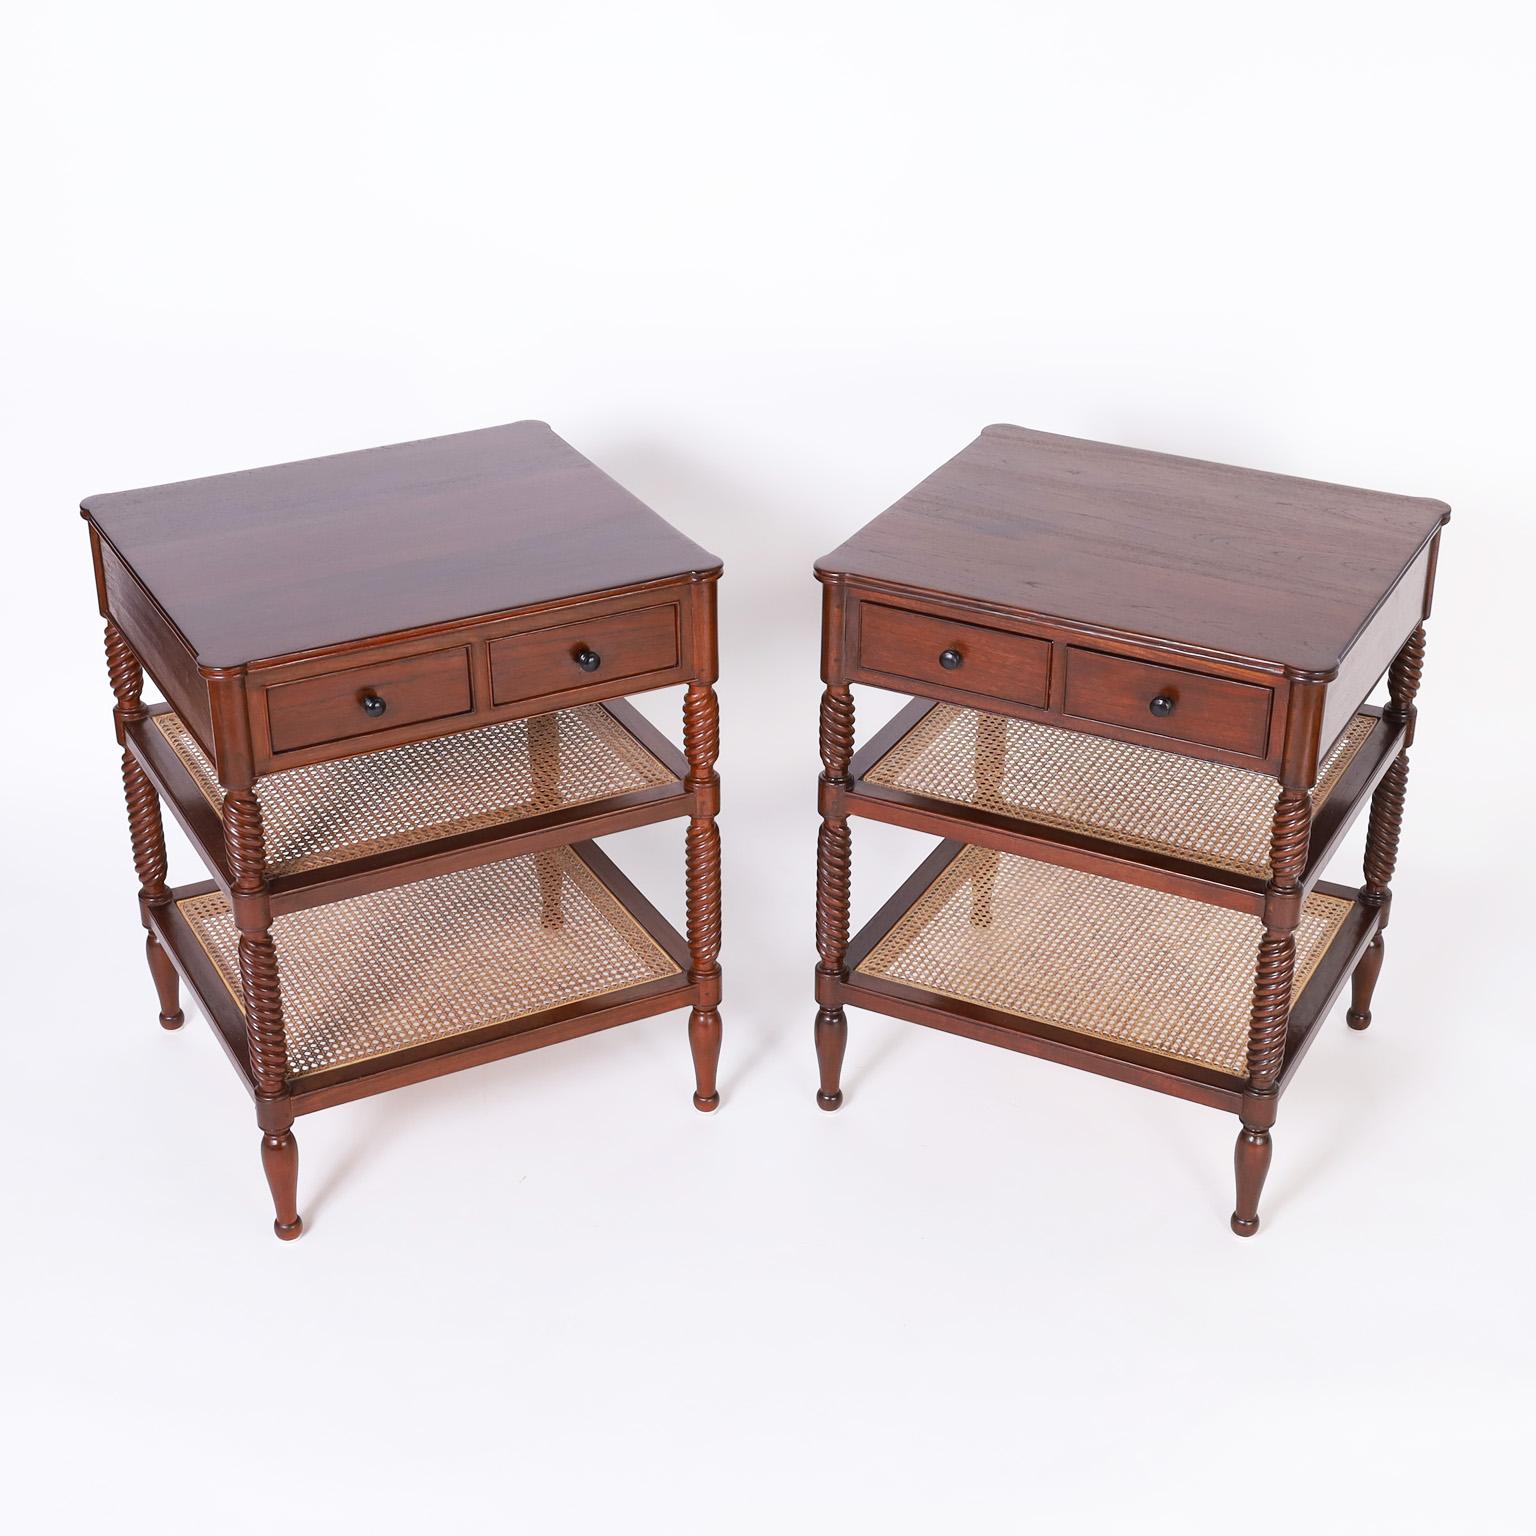 British Colonial Pair of Three Tiered Stands or Tables